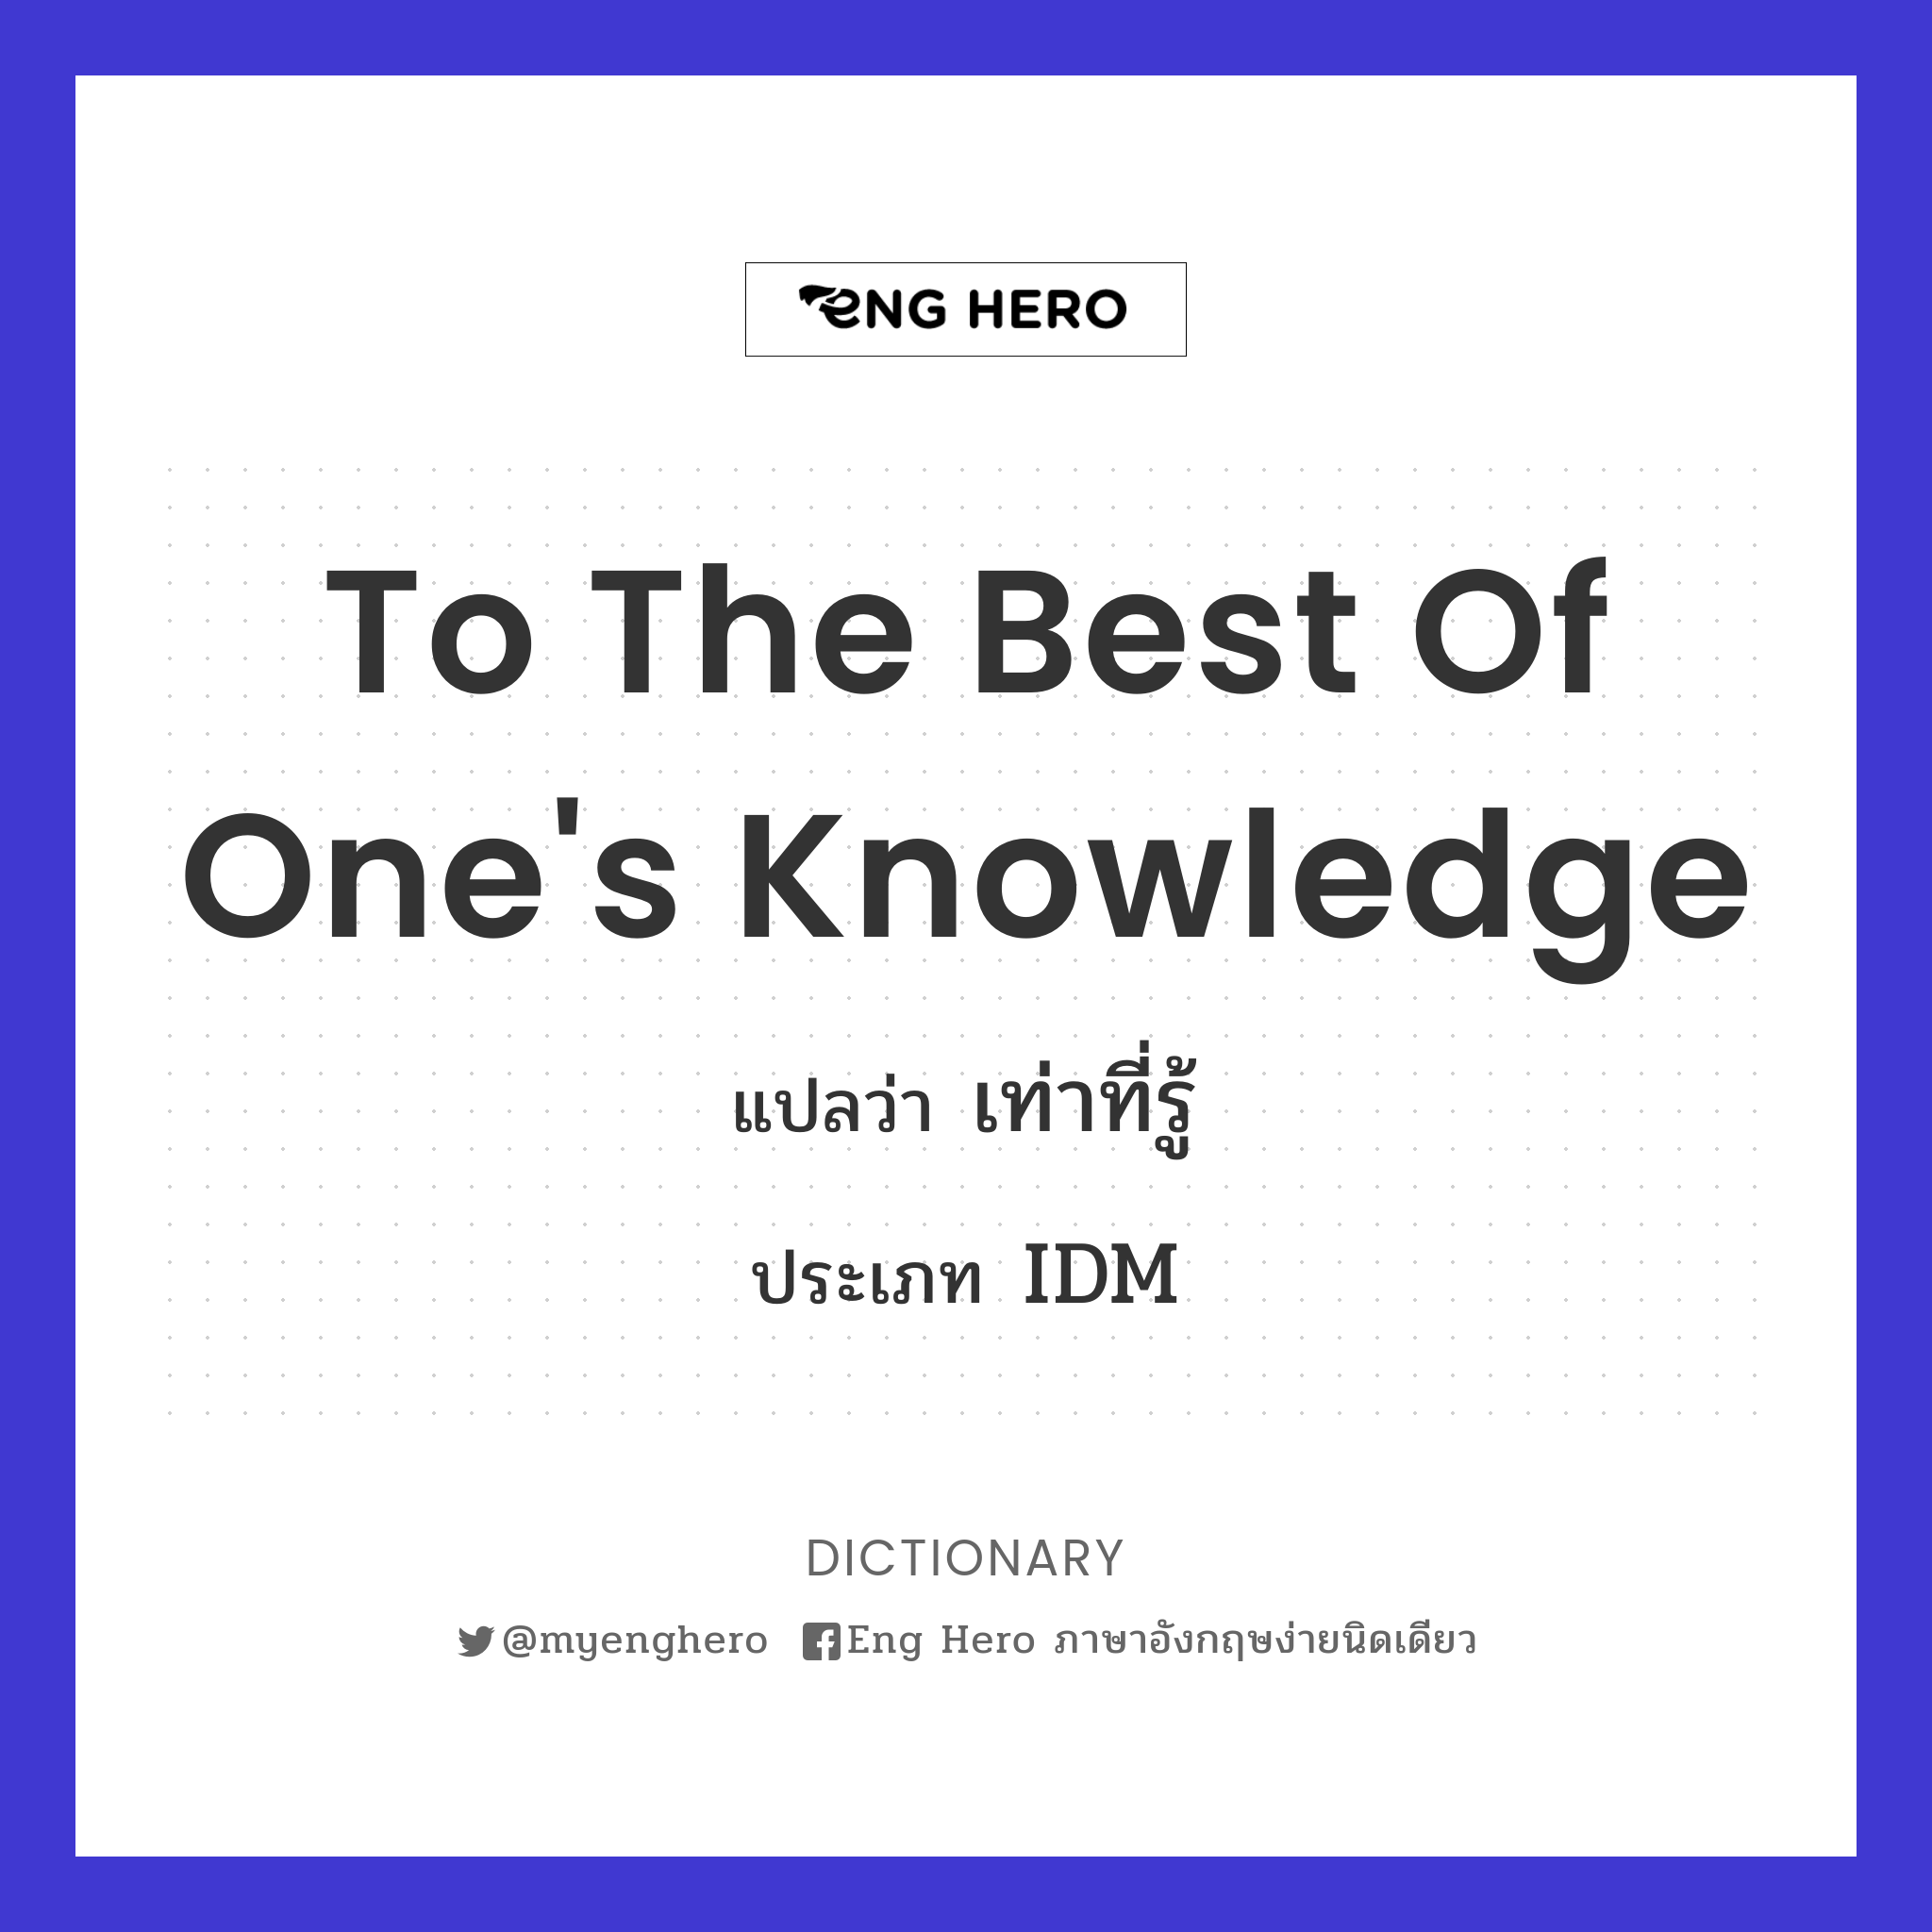 to the best of one's knowledge